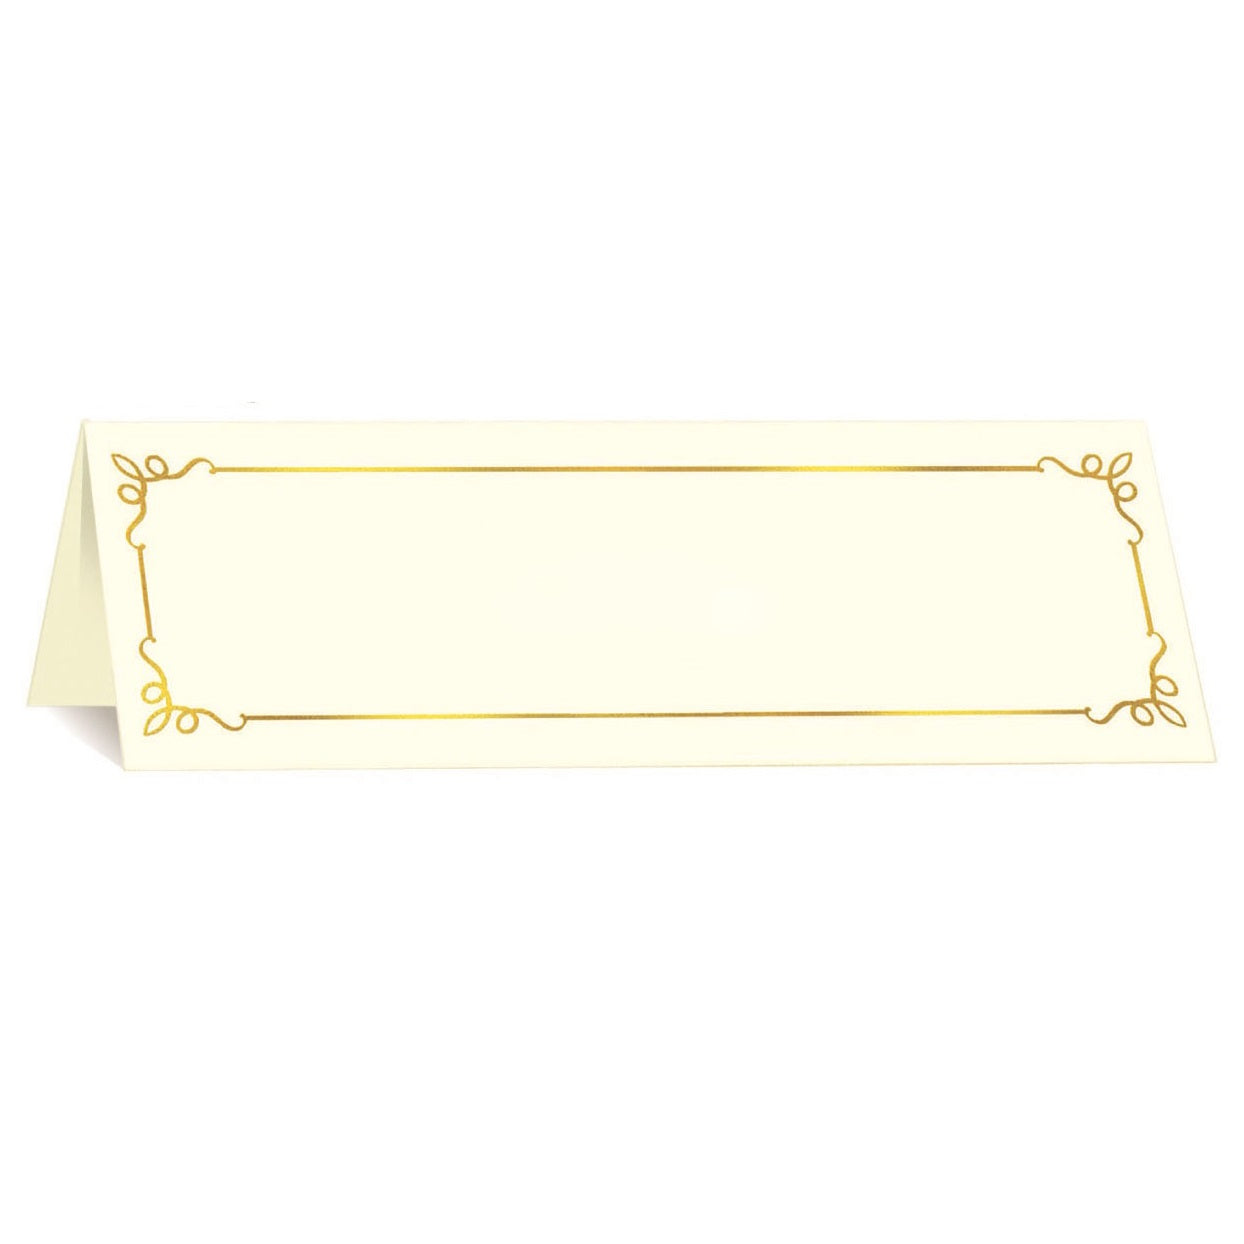 St. James® Overtures® Embassy Tent Cards, Ivory, Gold Foil, Fold to 8½ x 2¾", Pack of 50, 71446